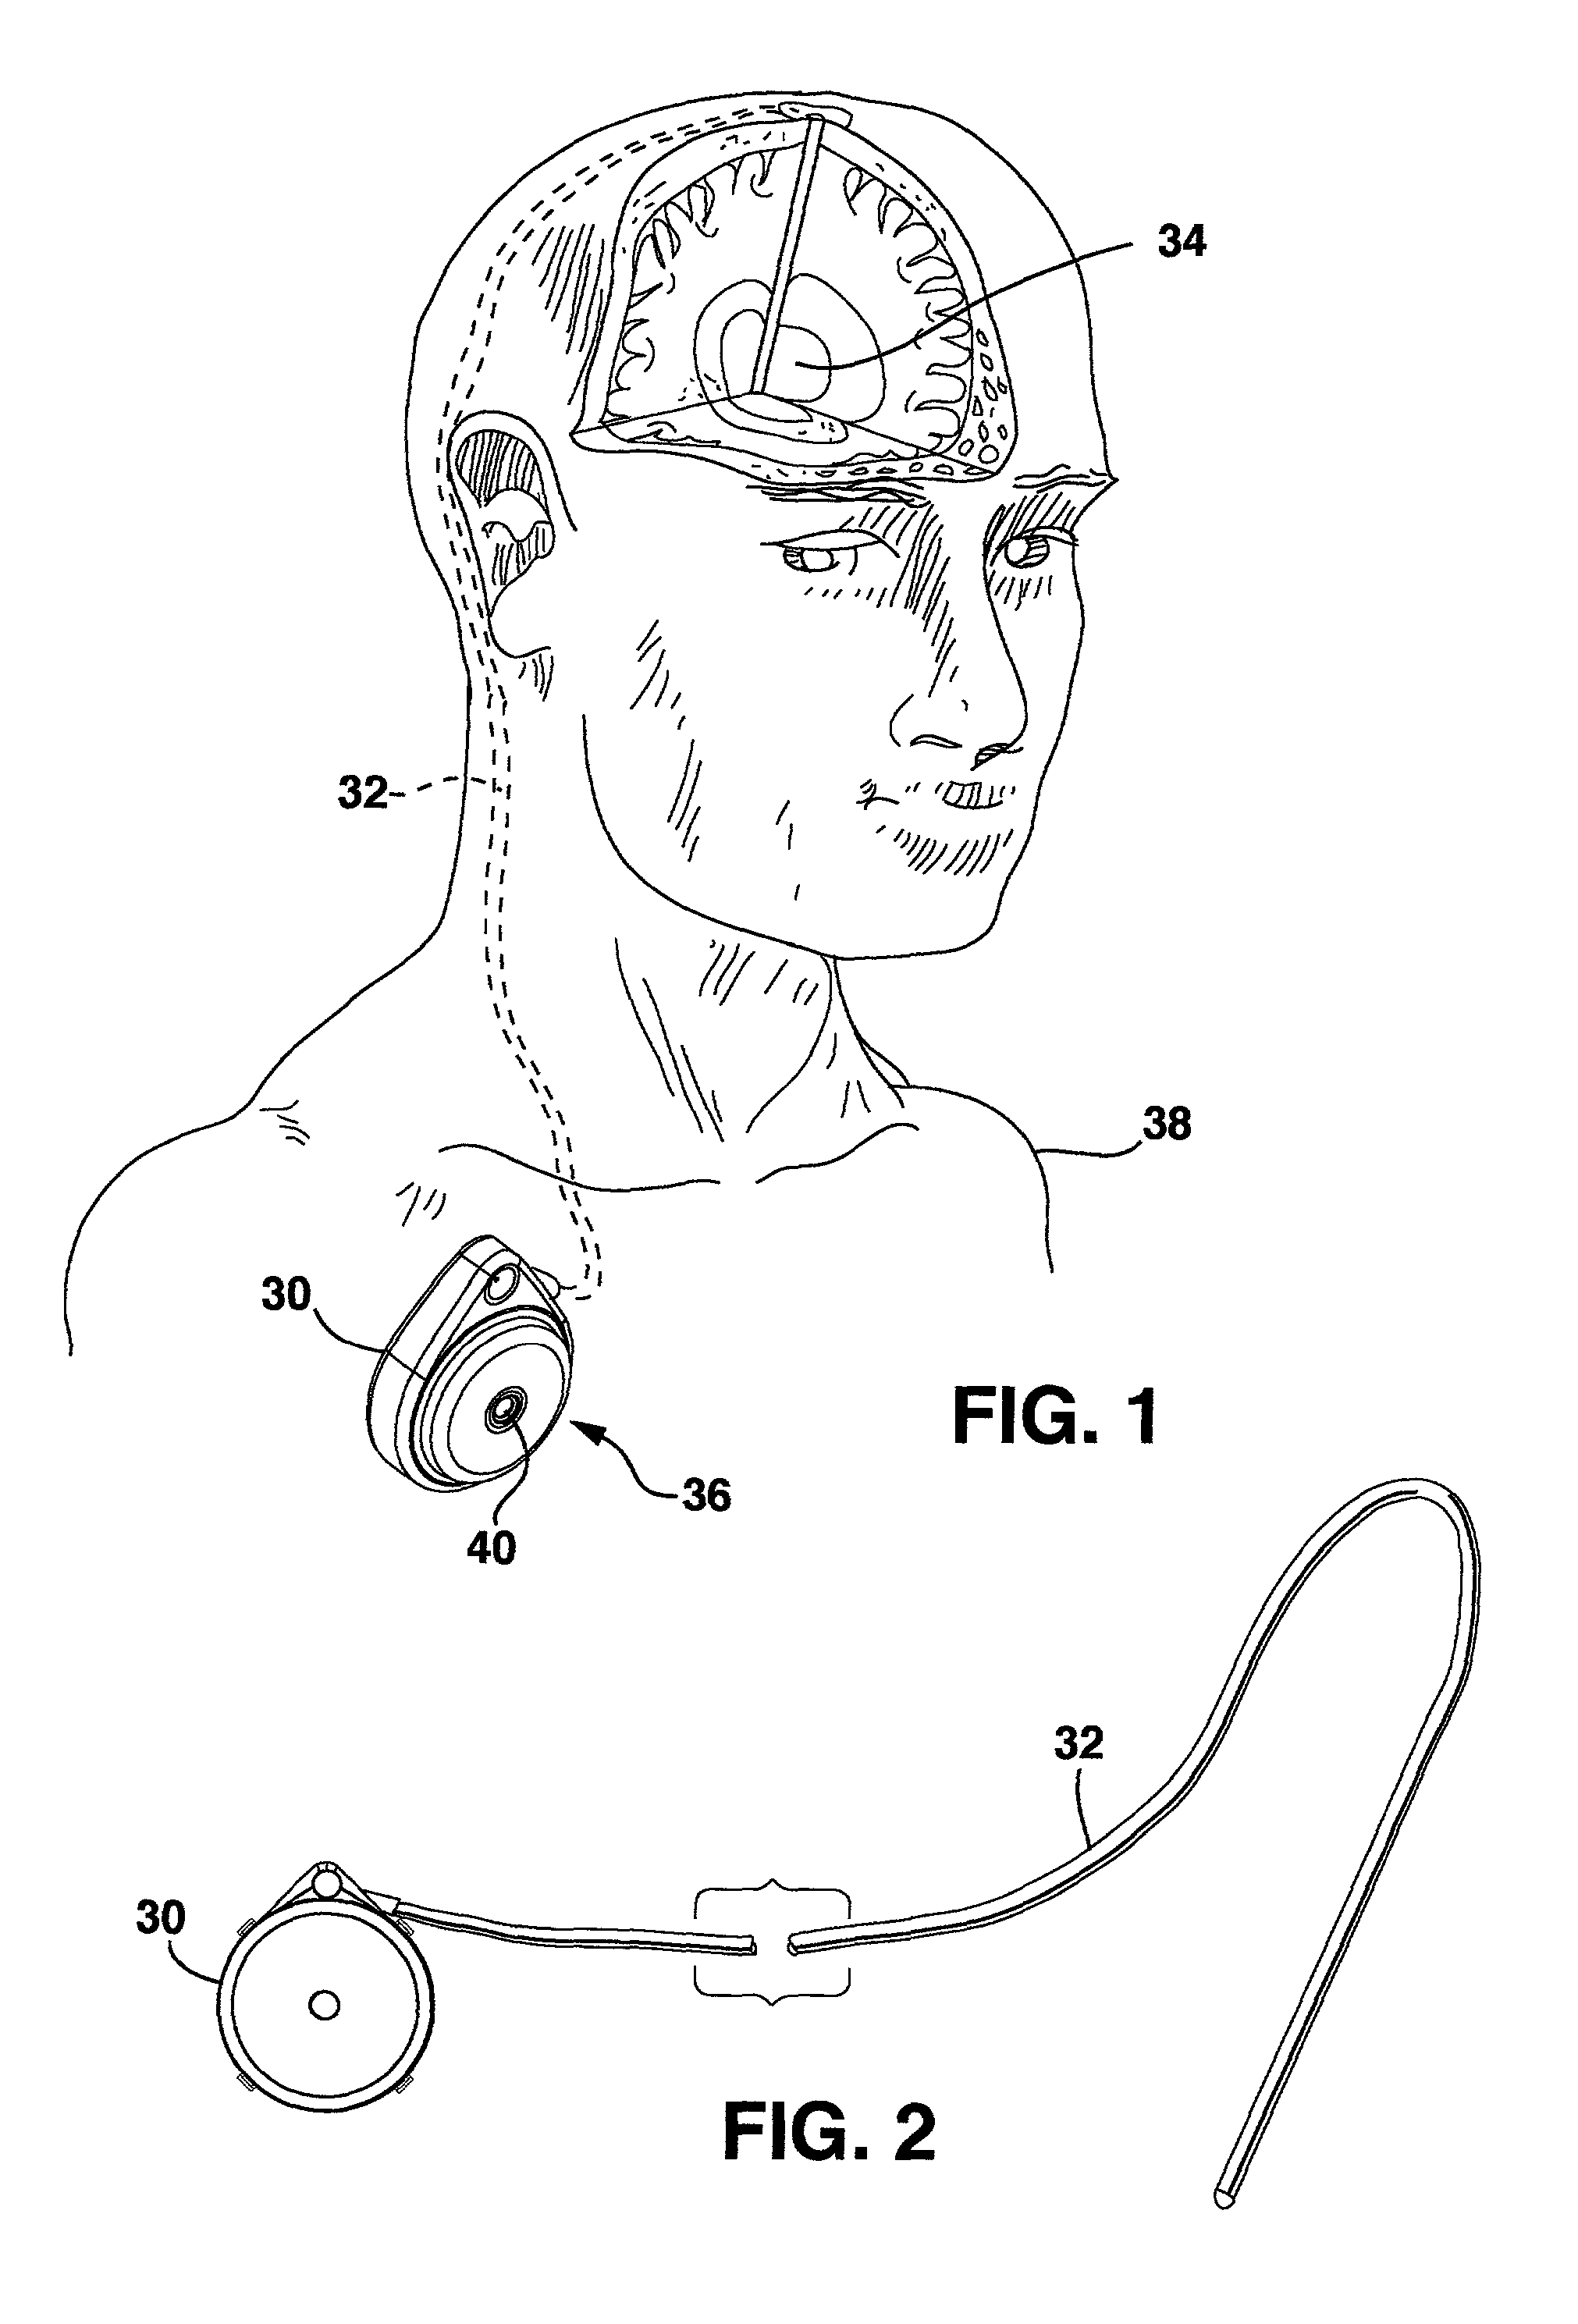 Permanent magnet solenoid pump for an implantable therapeutic substance delivery device